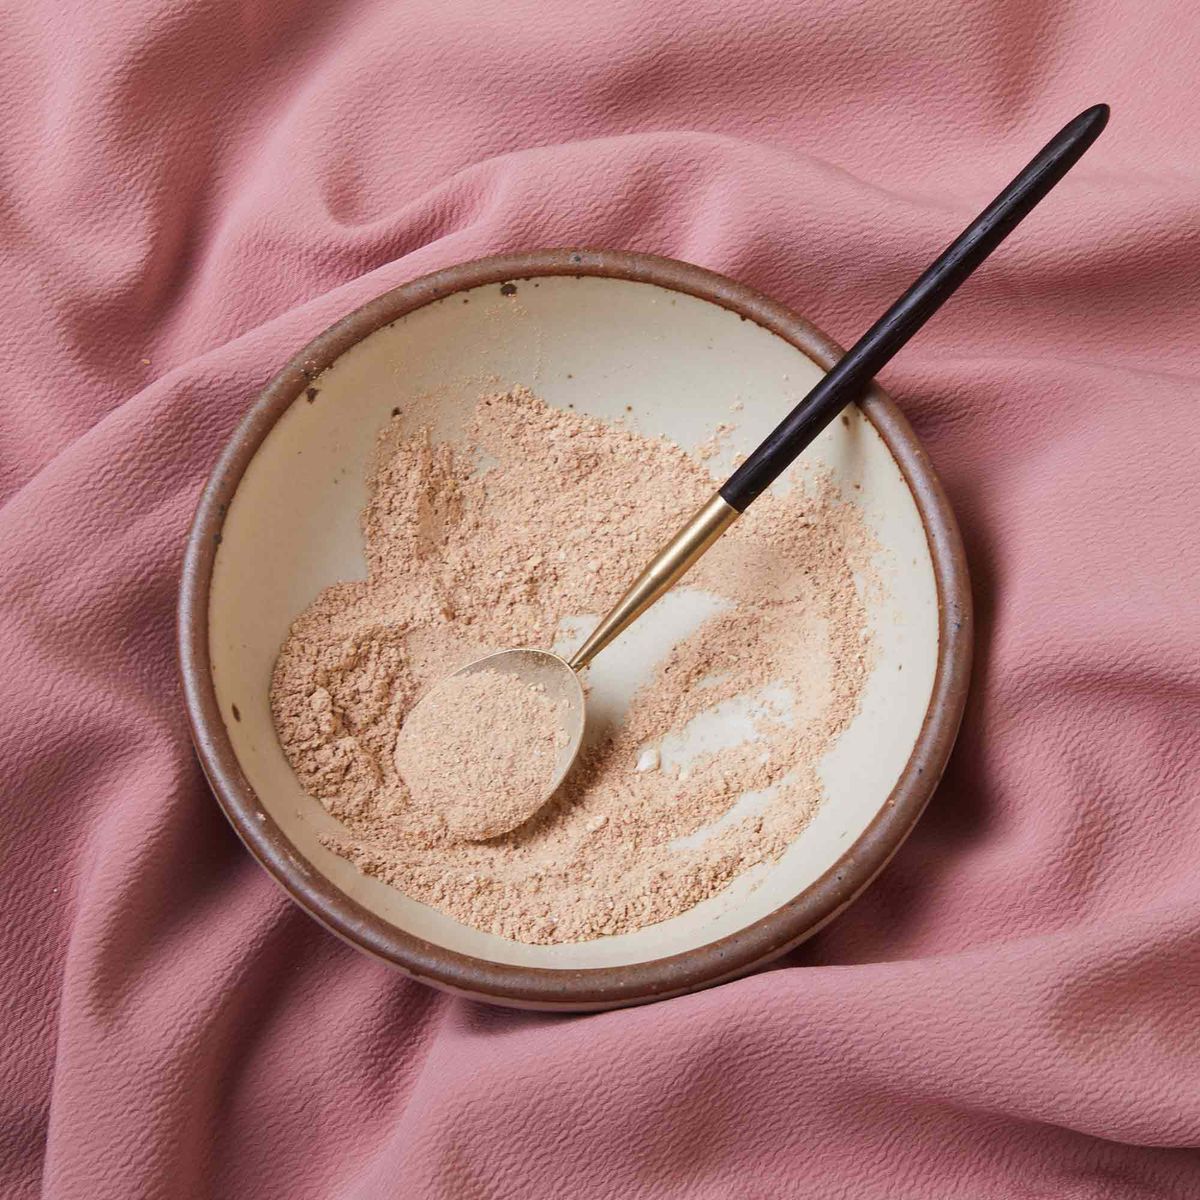 A long-handled brass spoon sits in a pile of pink flour-like powder in an East Fork bowl